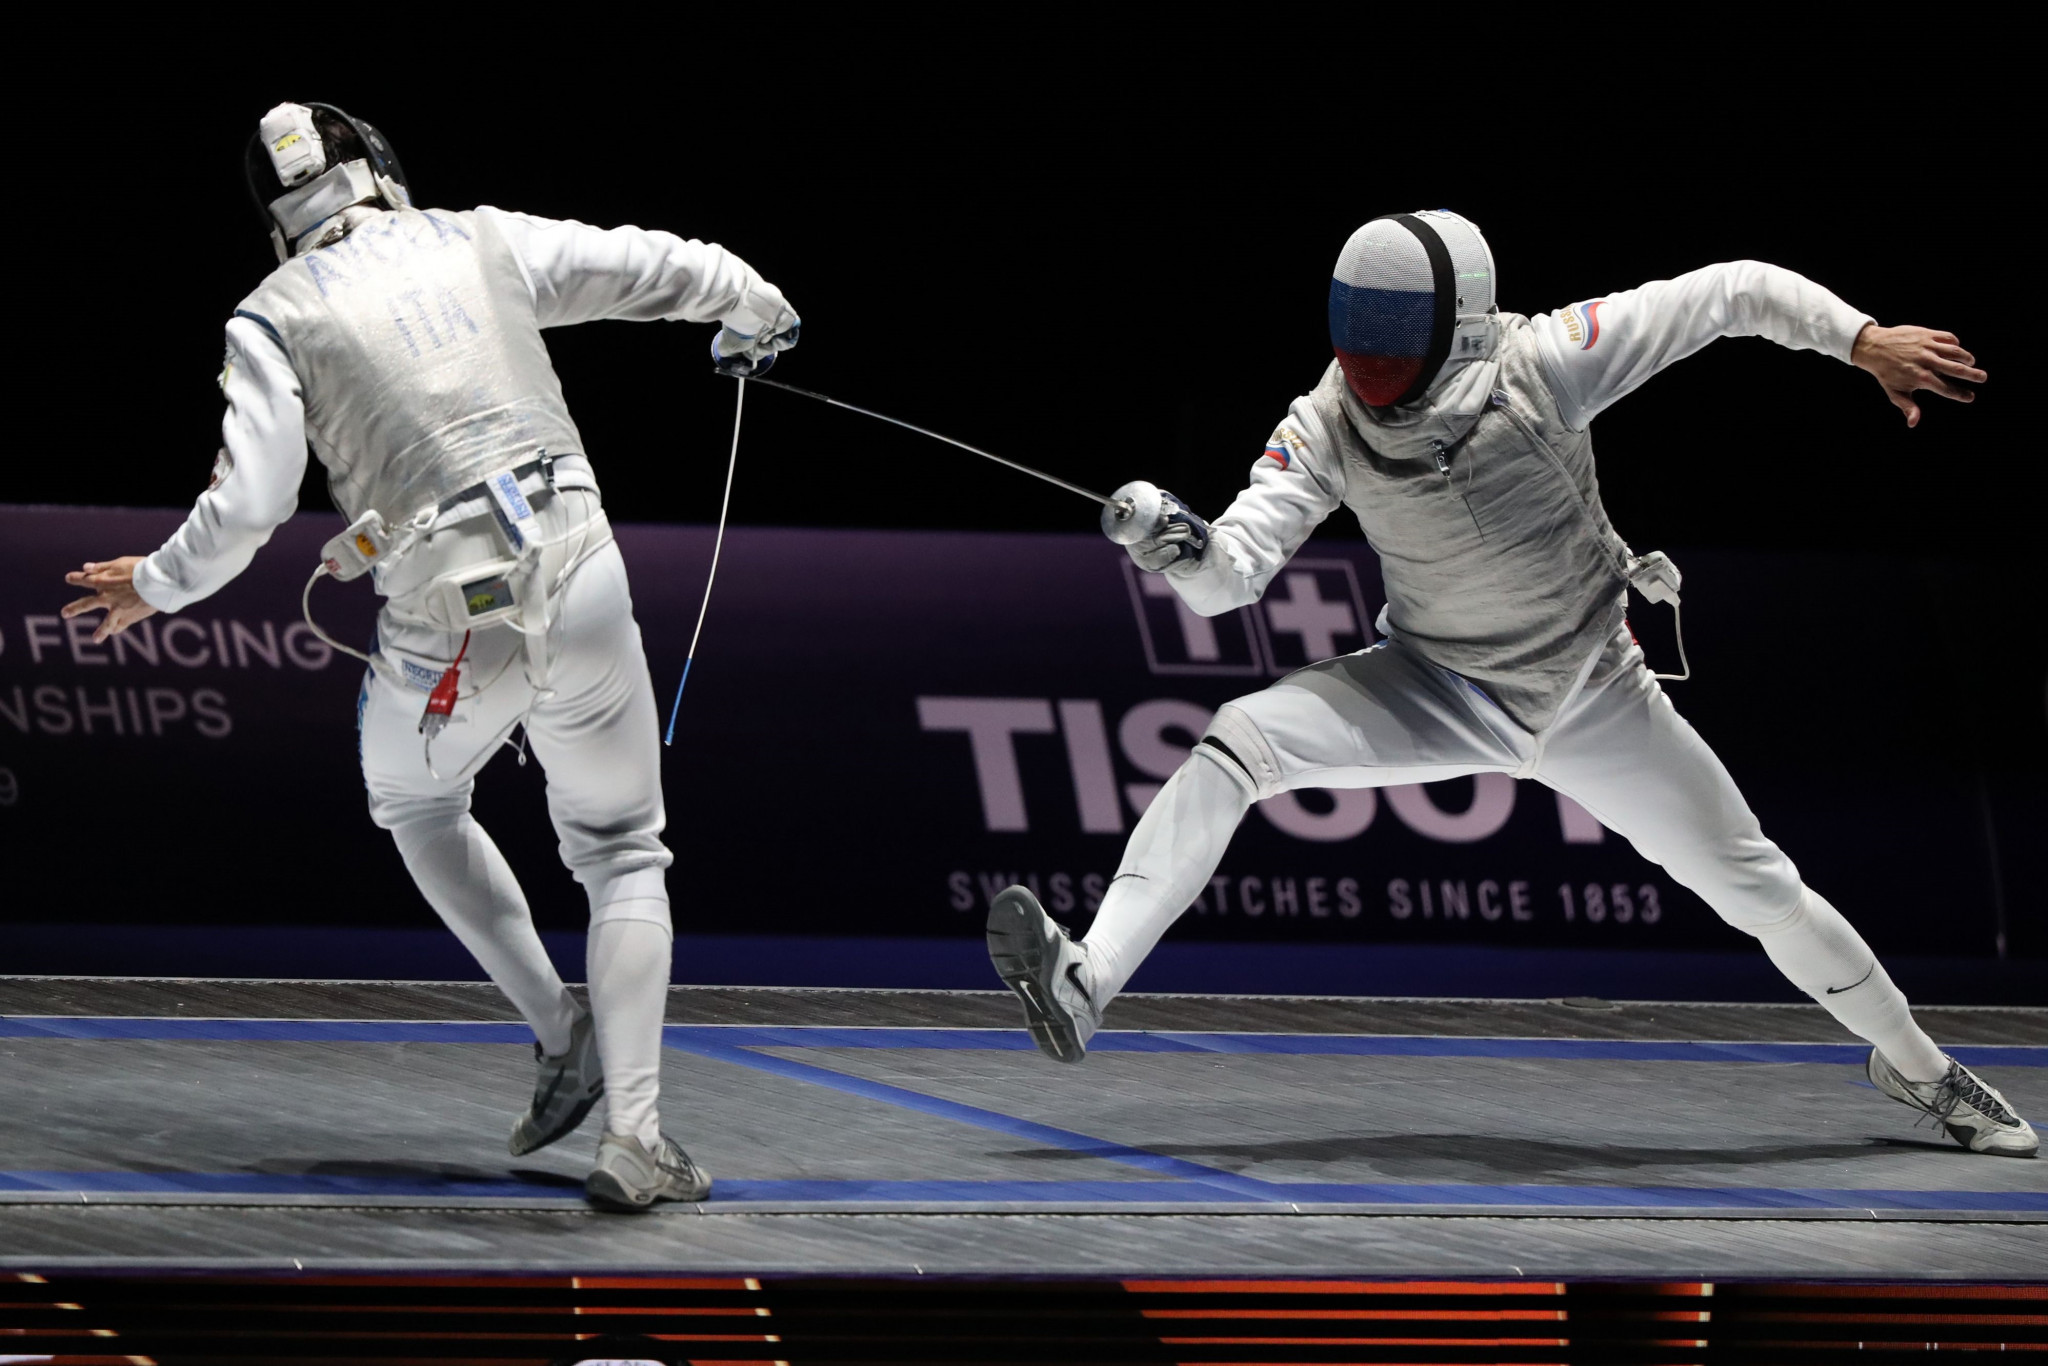 Russian and Belarusian fencers to remain banned until March as FIE delays vote